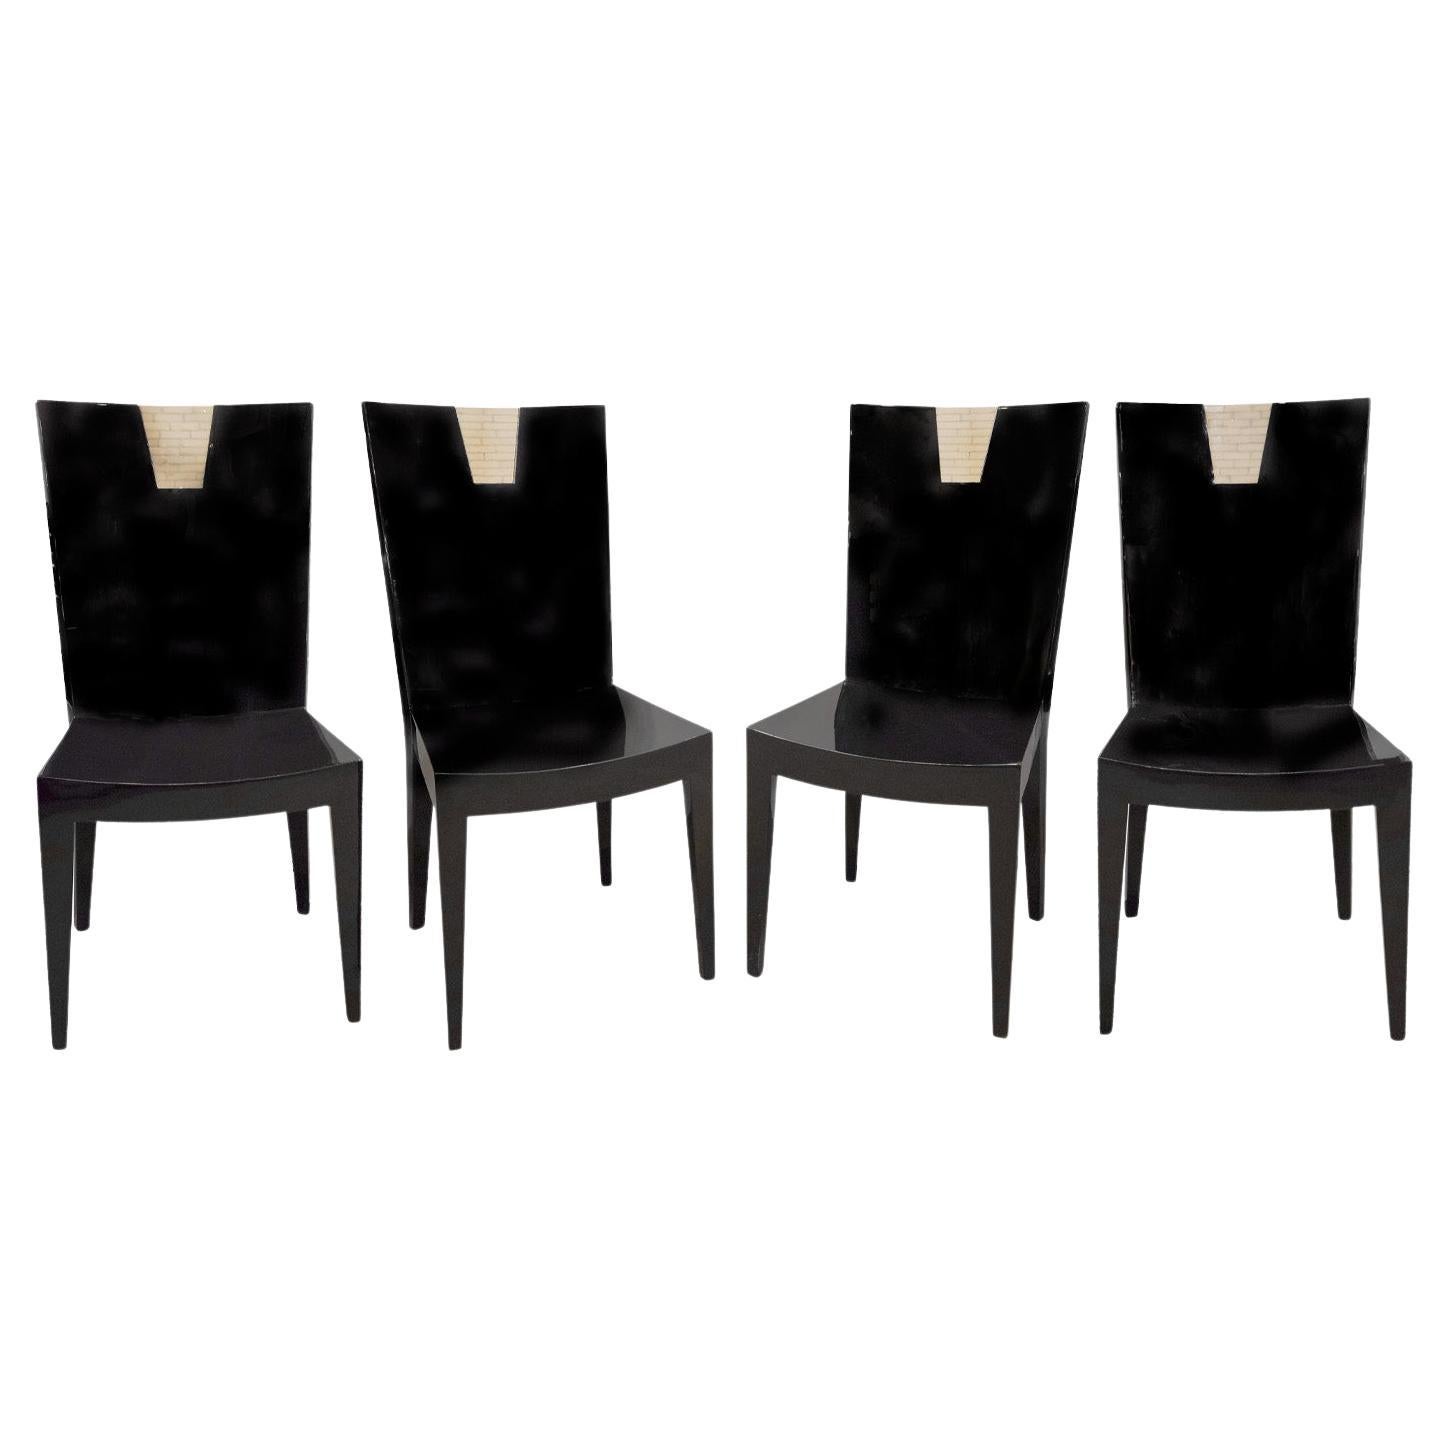 Set of 4 Chic Game/Dining Chairs in Black Lacquer with Bone Inlays 1980s